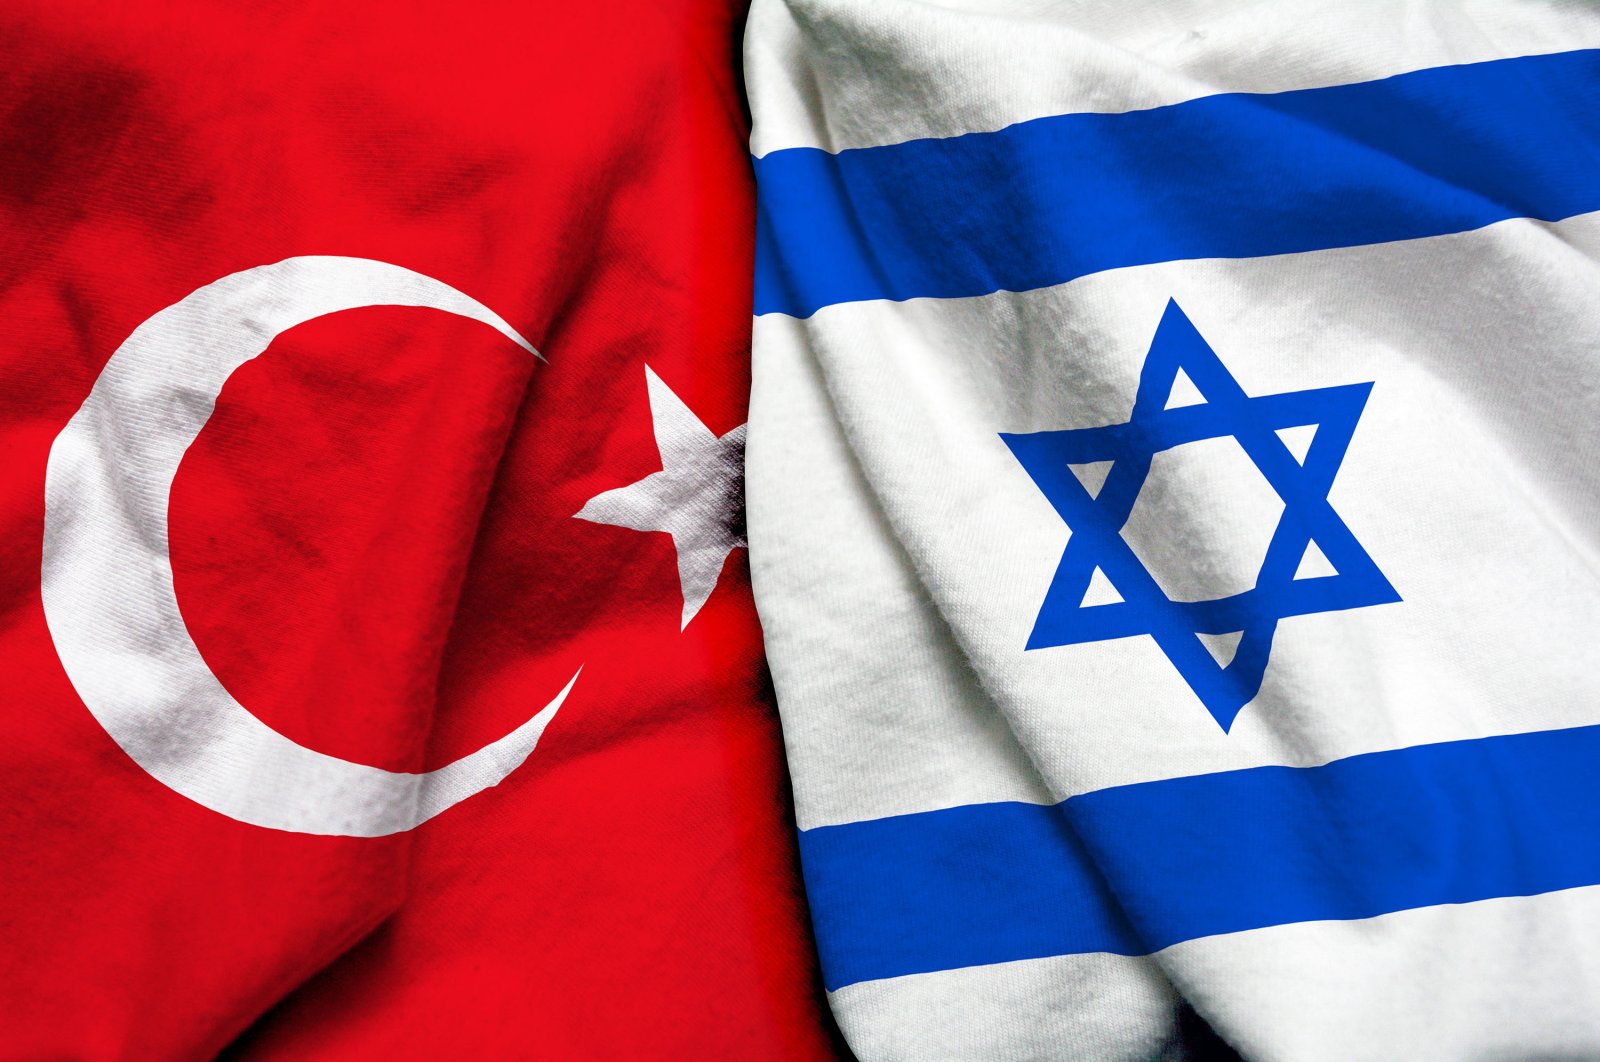 Turkey and Israel&#039;s flags in this undated photo. (Shutterstock File Photo)